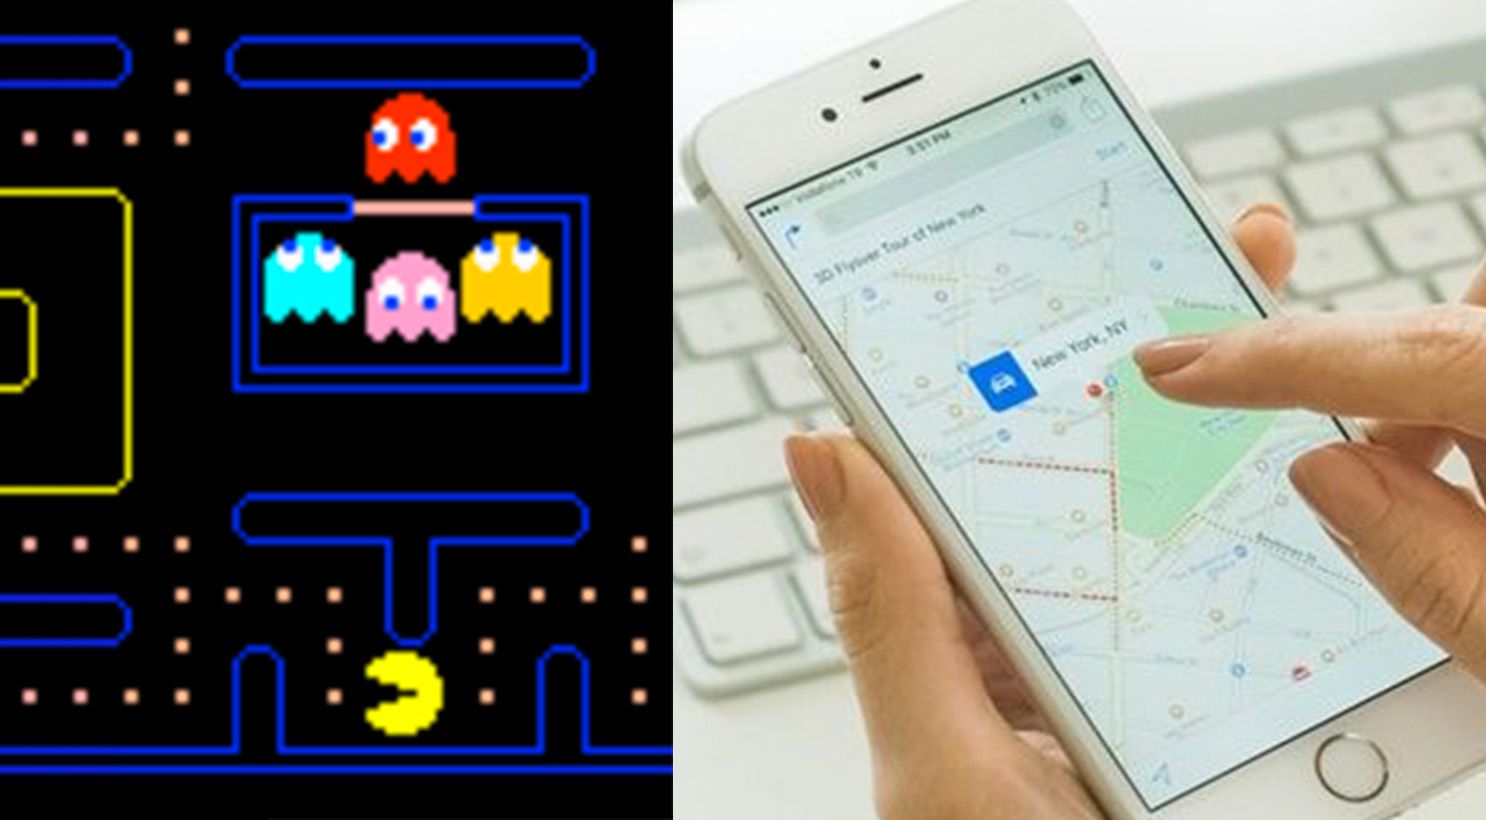 You can play Pac-Man inside Google Maps, from mobile or desktop